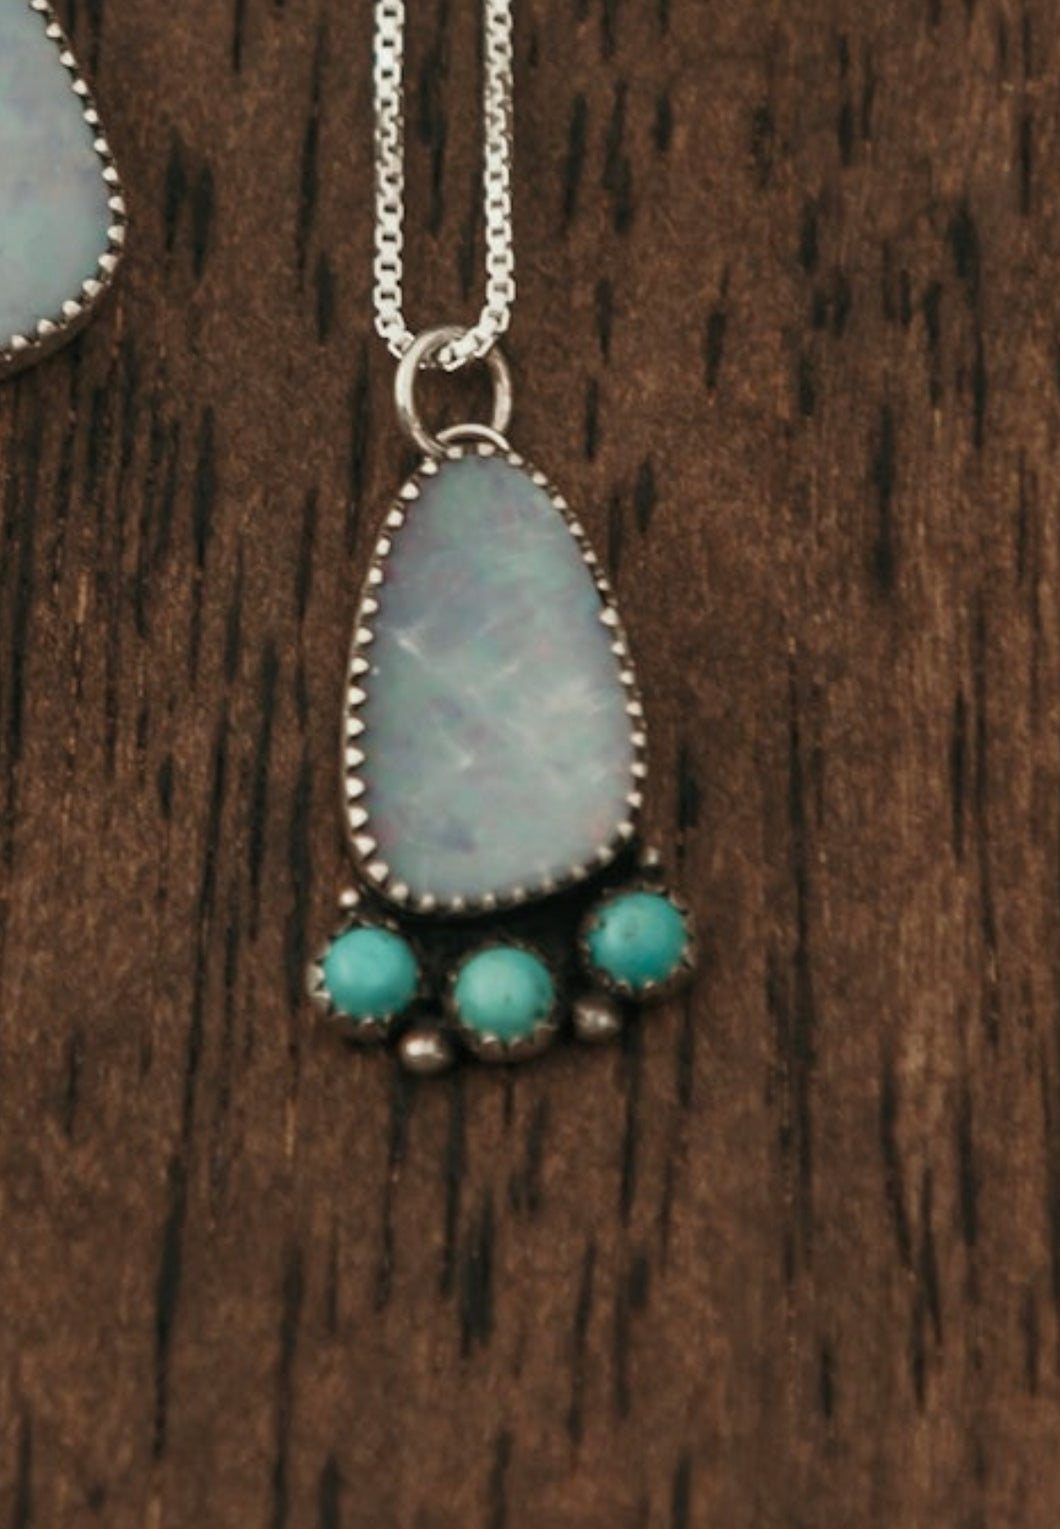 Opal and Kingman Necklaces